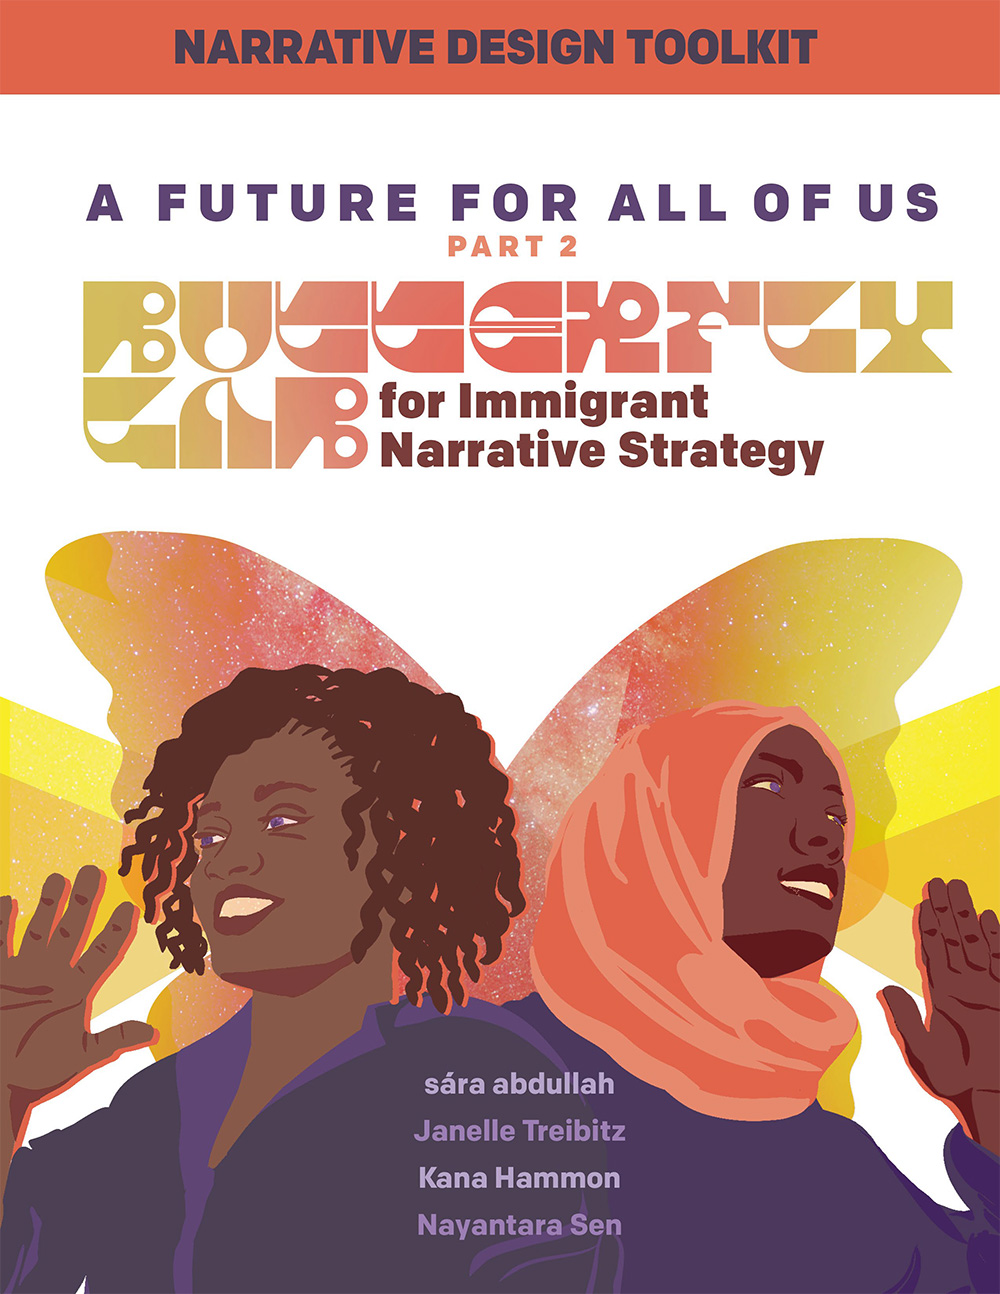 Cover for A Future for All of Us Part 2, Butterflylab for Immigrant Narratives Research Findings Report. Drawing of two people waving in front of abstract butterfly wings.